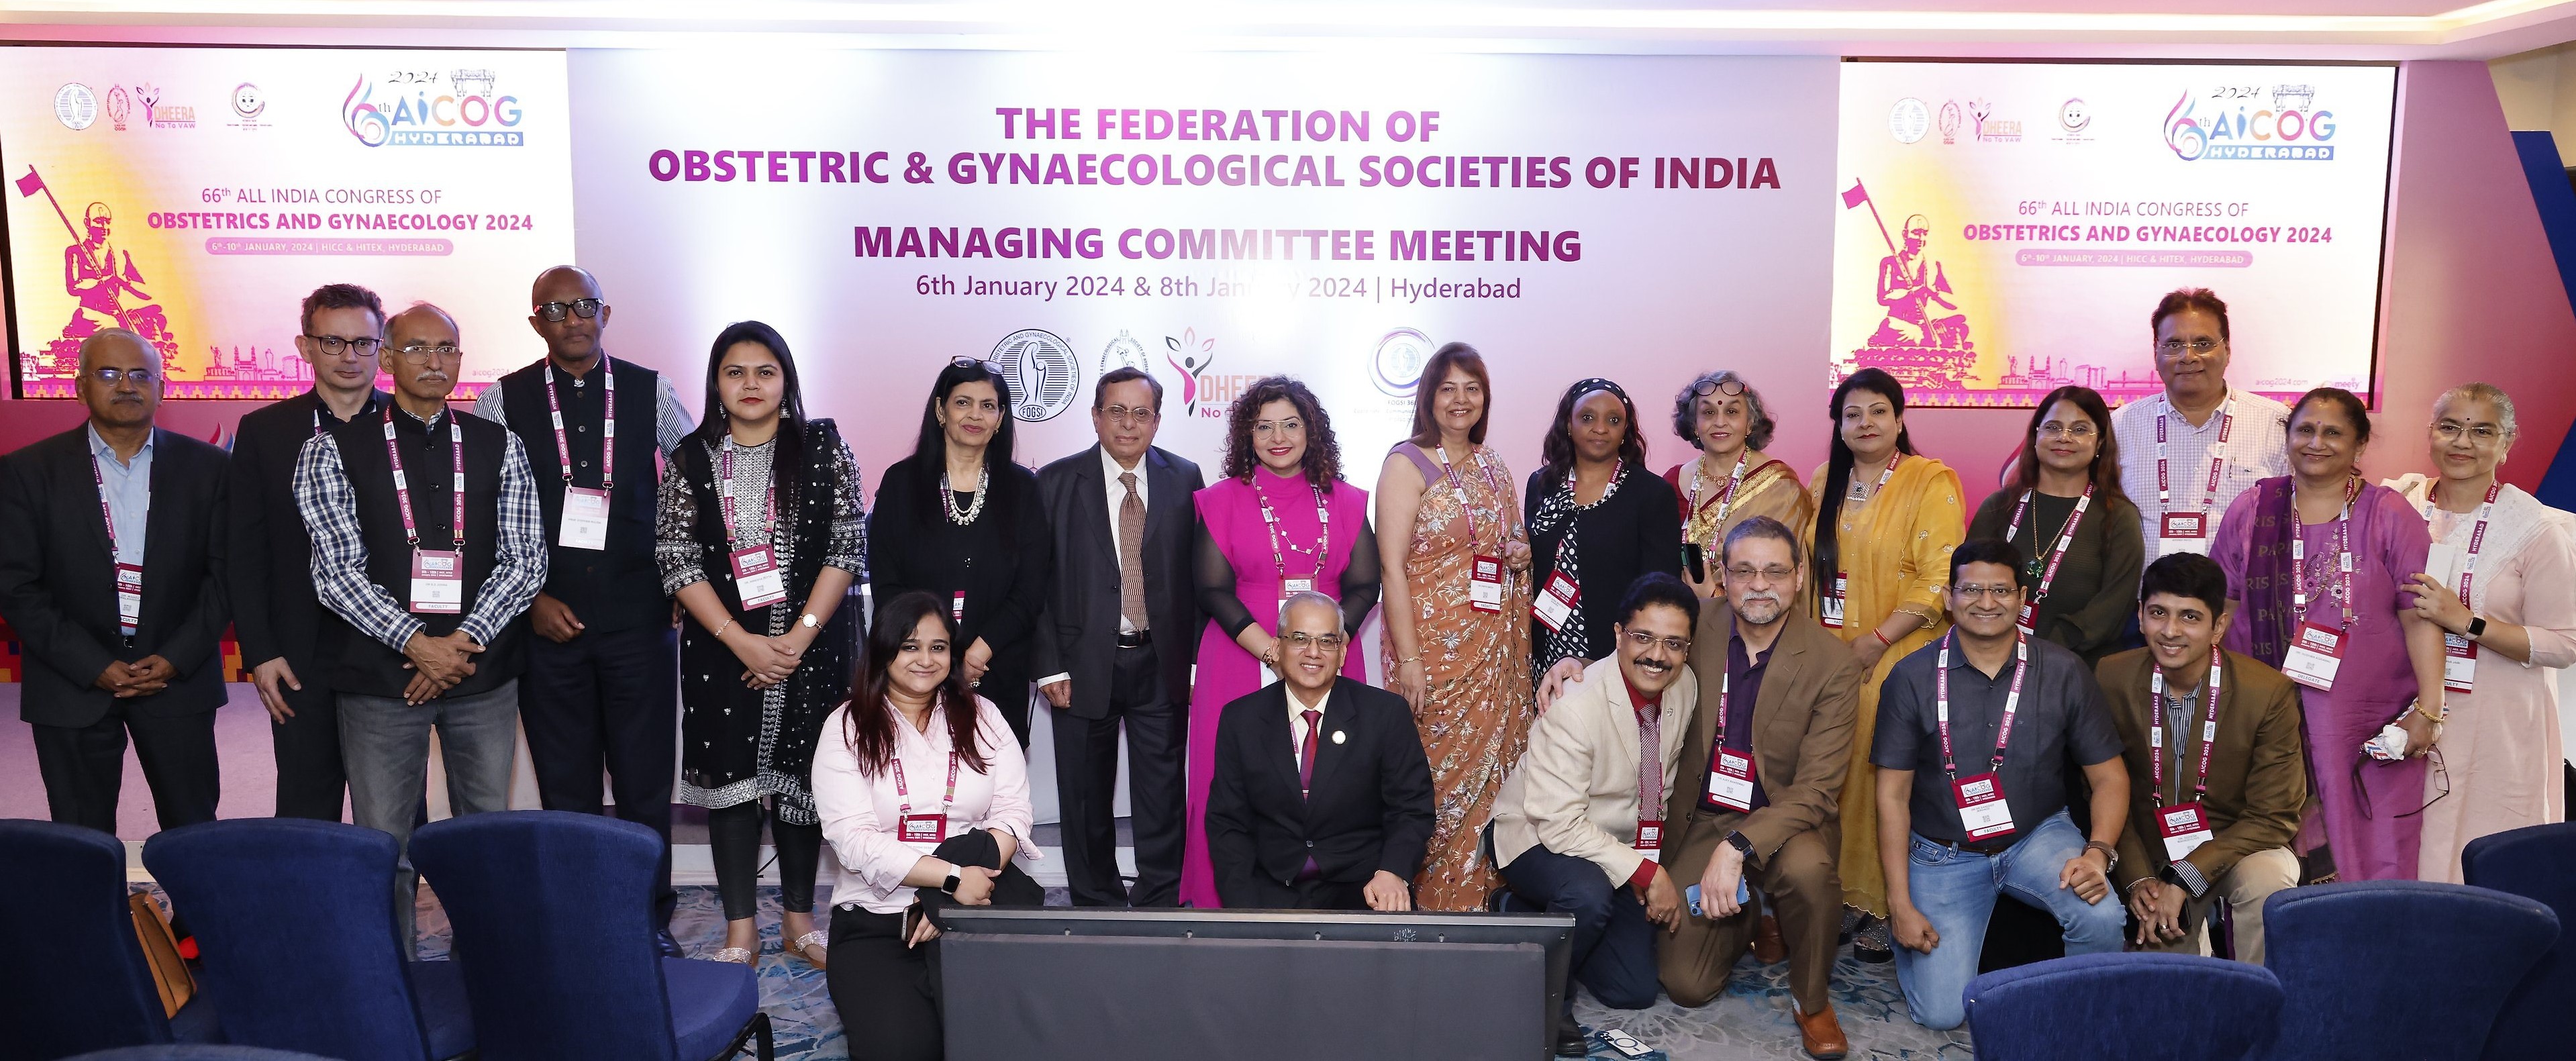 Figure 2: Orientation and training session on the LDI:REACH programme for FOGSI leaders and members at the 66th All India Congress of Obstetrics and Gynaecology 2024.  